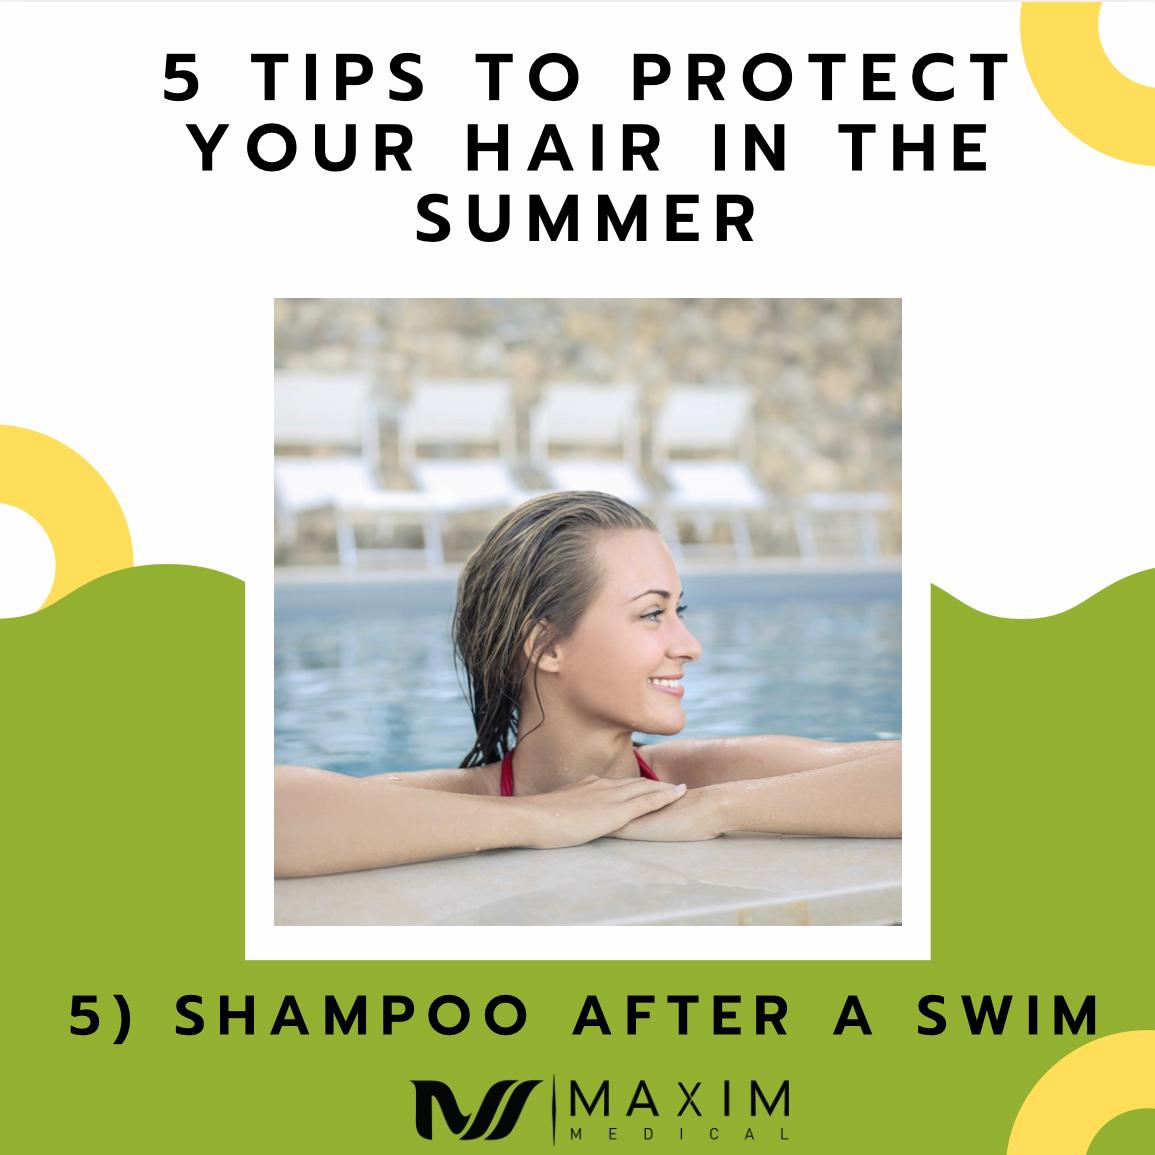 5 Tips To Protect Your Hair In The Summer

5. Shampoo After Swim
Though shampooing your hair everyday can be counteractive towards its health, it is a good idea to get into this habit after days you spent at the beach or pool. A day at the beach or pool can leave a lot of debris, sand, and chlorine that can block the pores on the scalp and restrict proper hair growth...